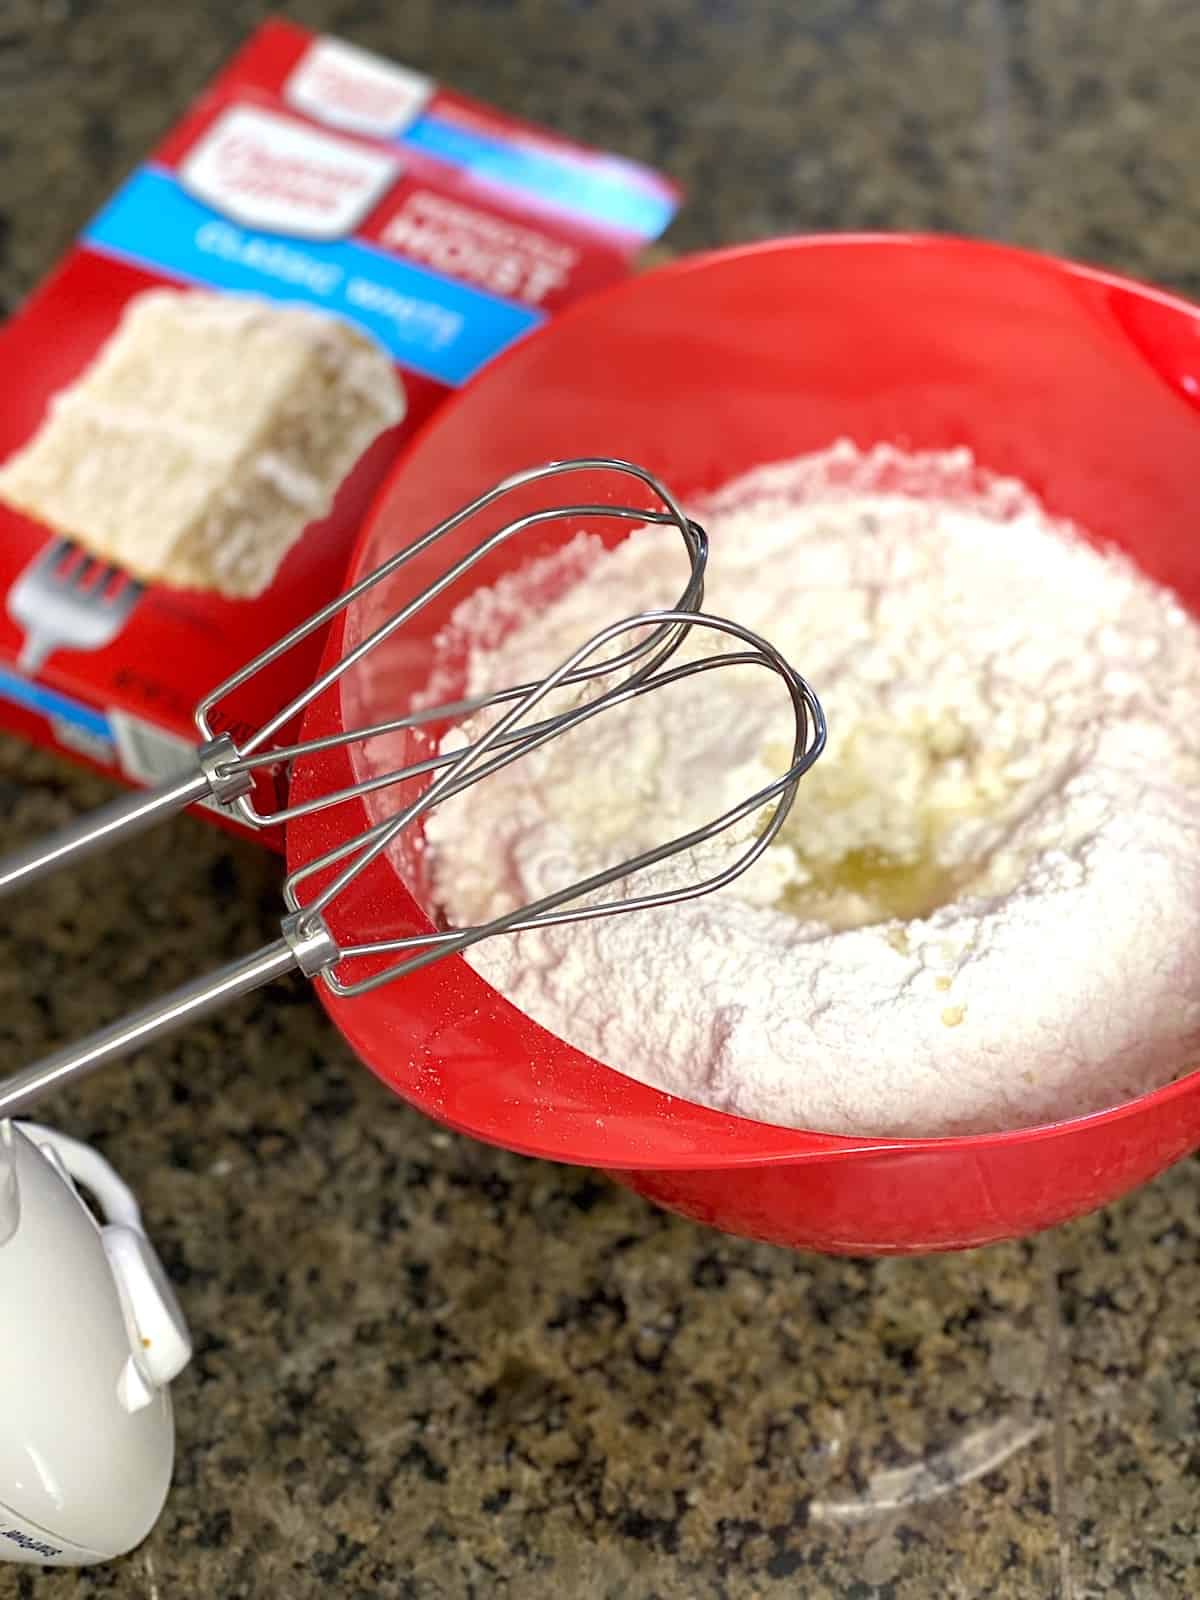  Mixing Bowl filled with cake mix and ingredients.